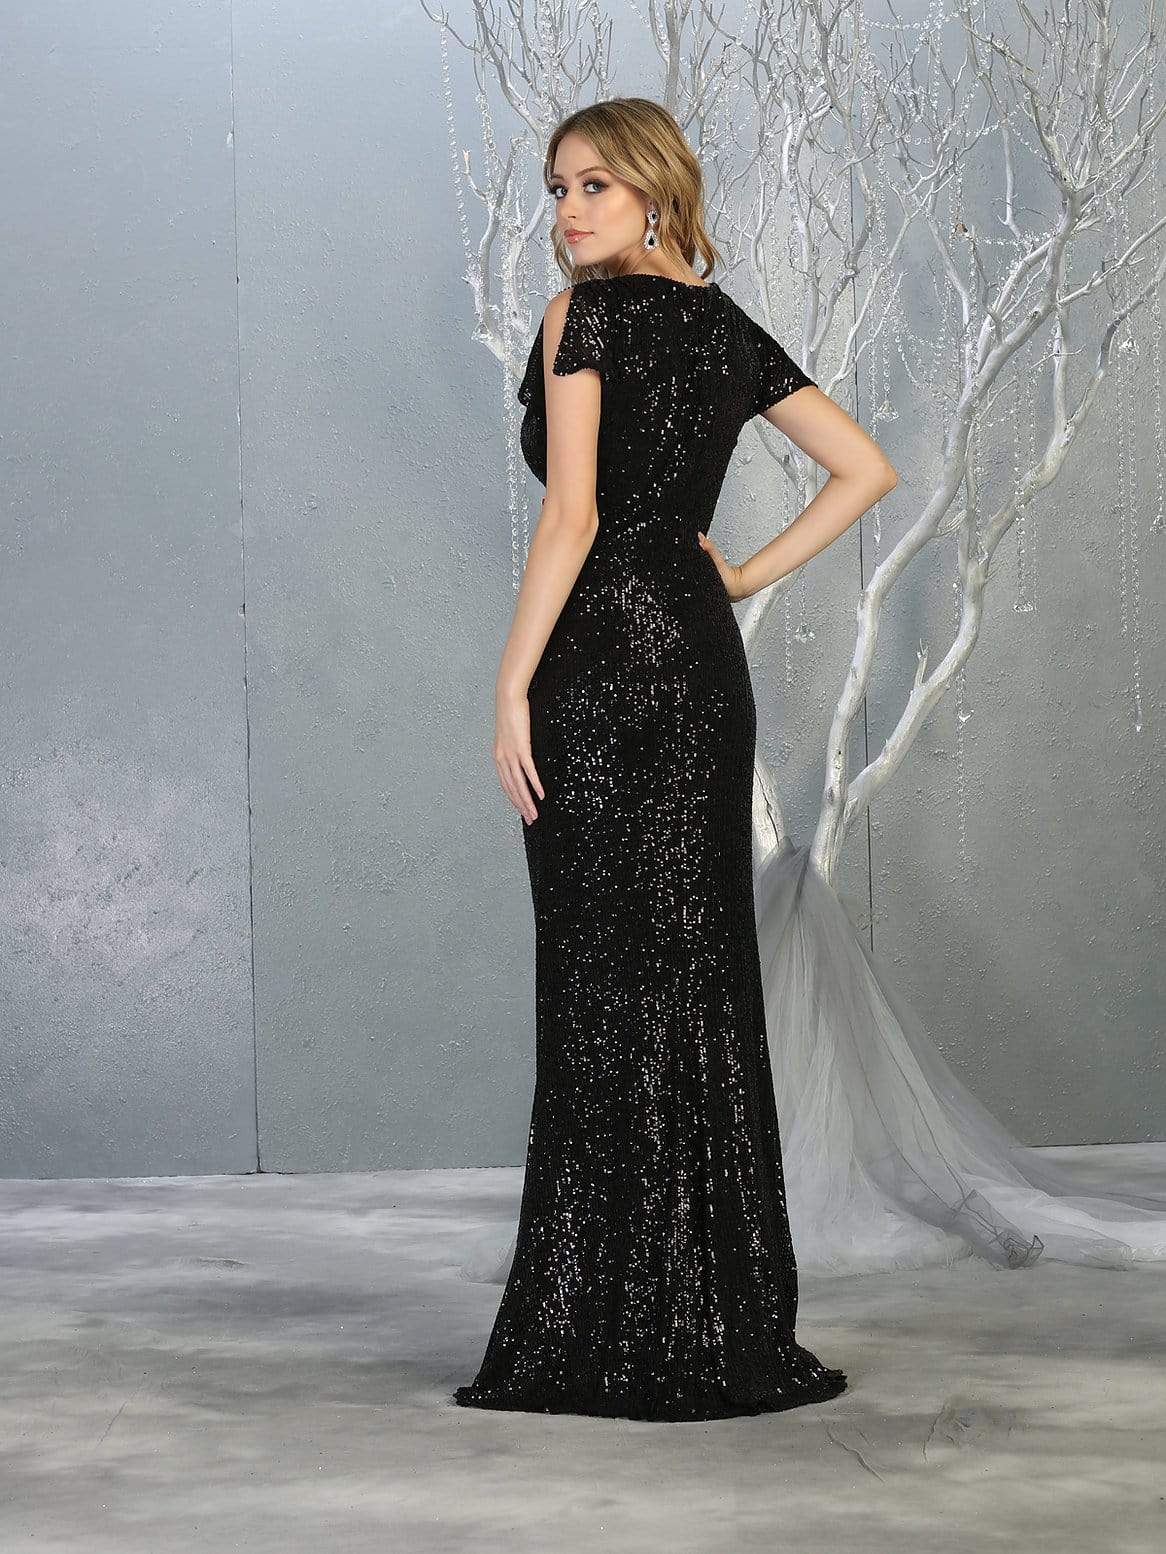 May Queen - RQ7794 Glitter Plunging V-Neck Knotted Gown Evening Dresses